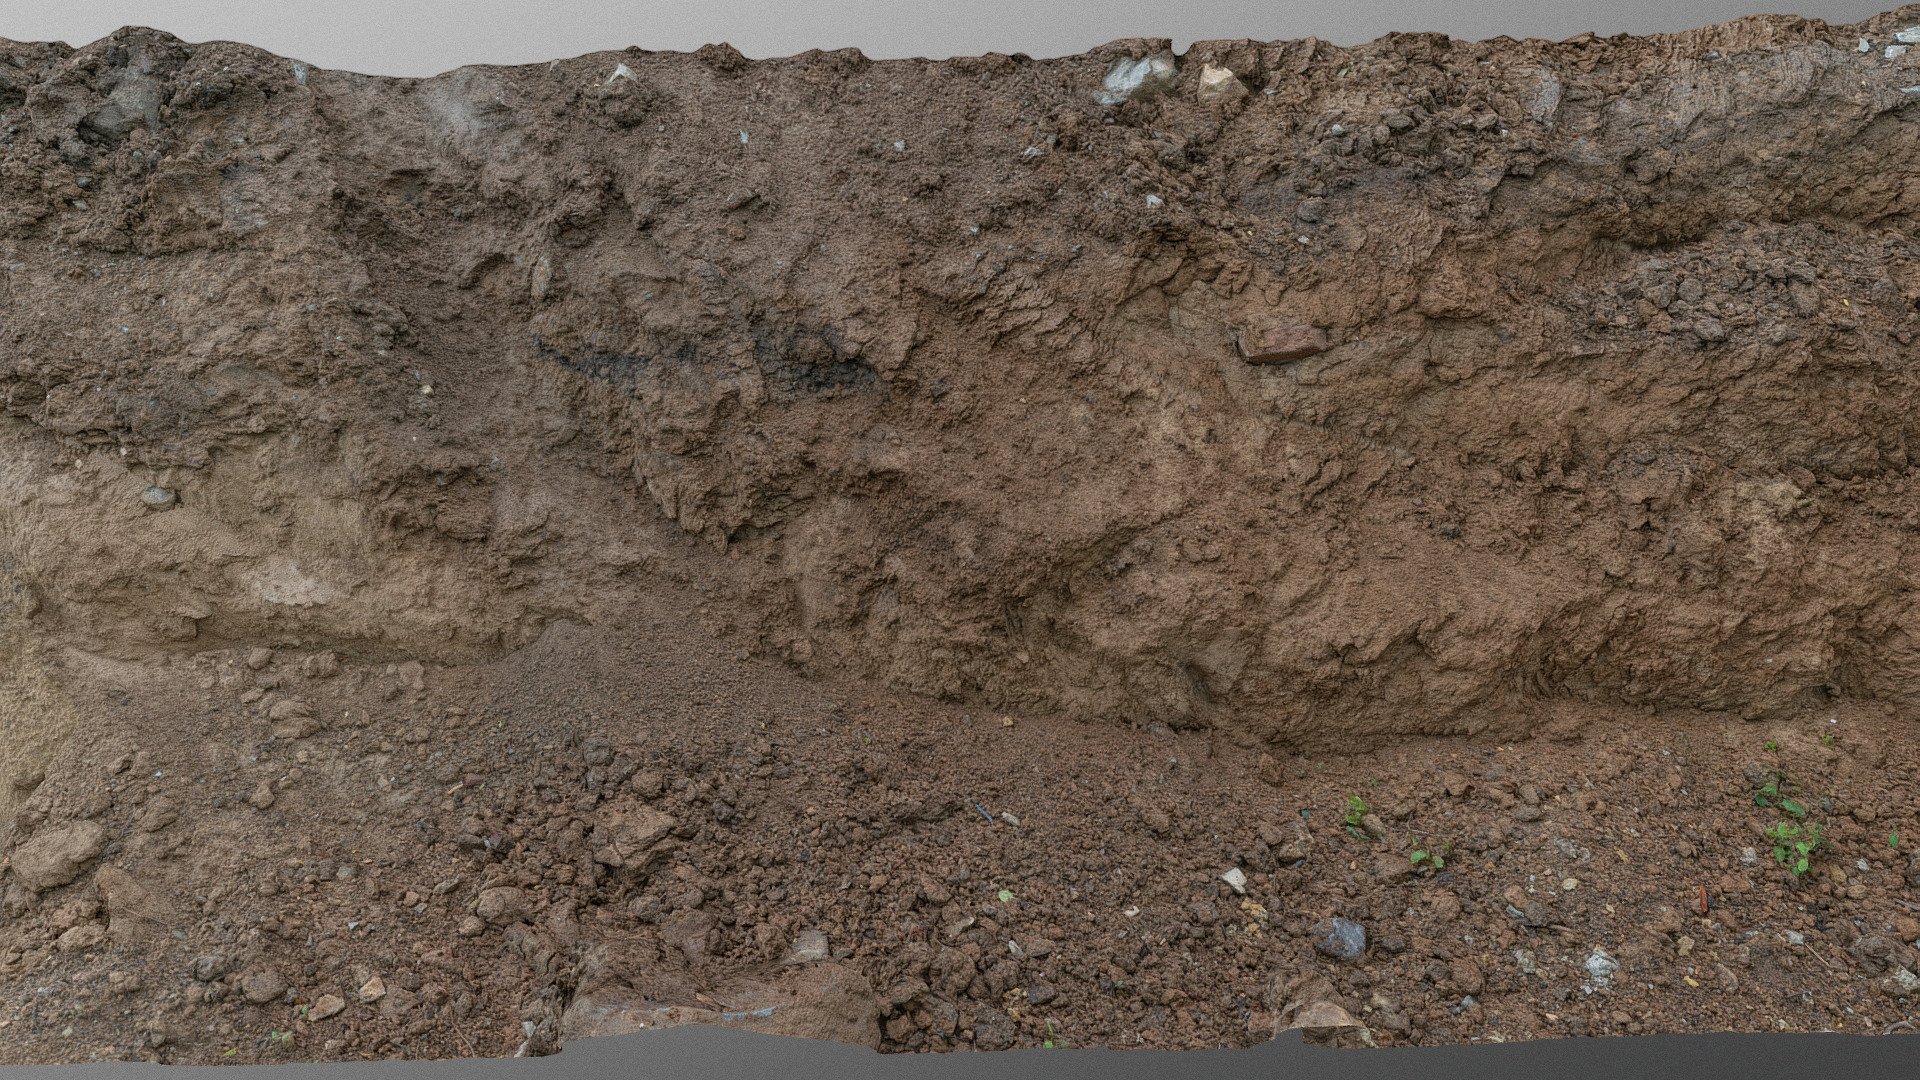 Construction dig site excavation building ground earth work, dug-out  trench ditch, clay cliff wall

Photogrammetry scan 150 x 24MP, 3x16K textures + HD normals - Construction site dug-out trench ditch - Buy Royalty Free 3D model by matousekfoto 3d model